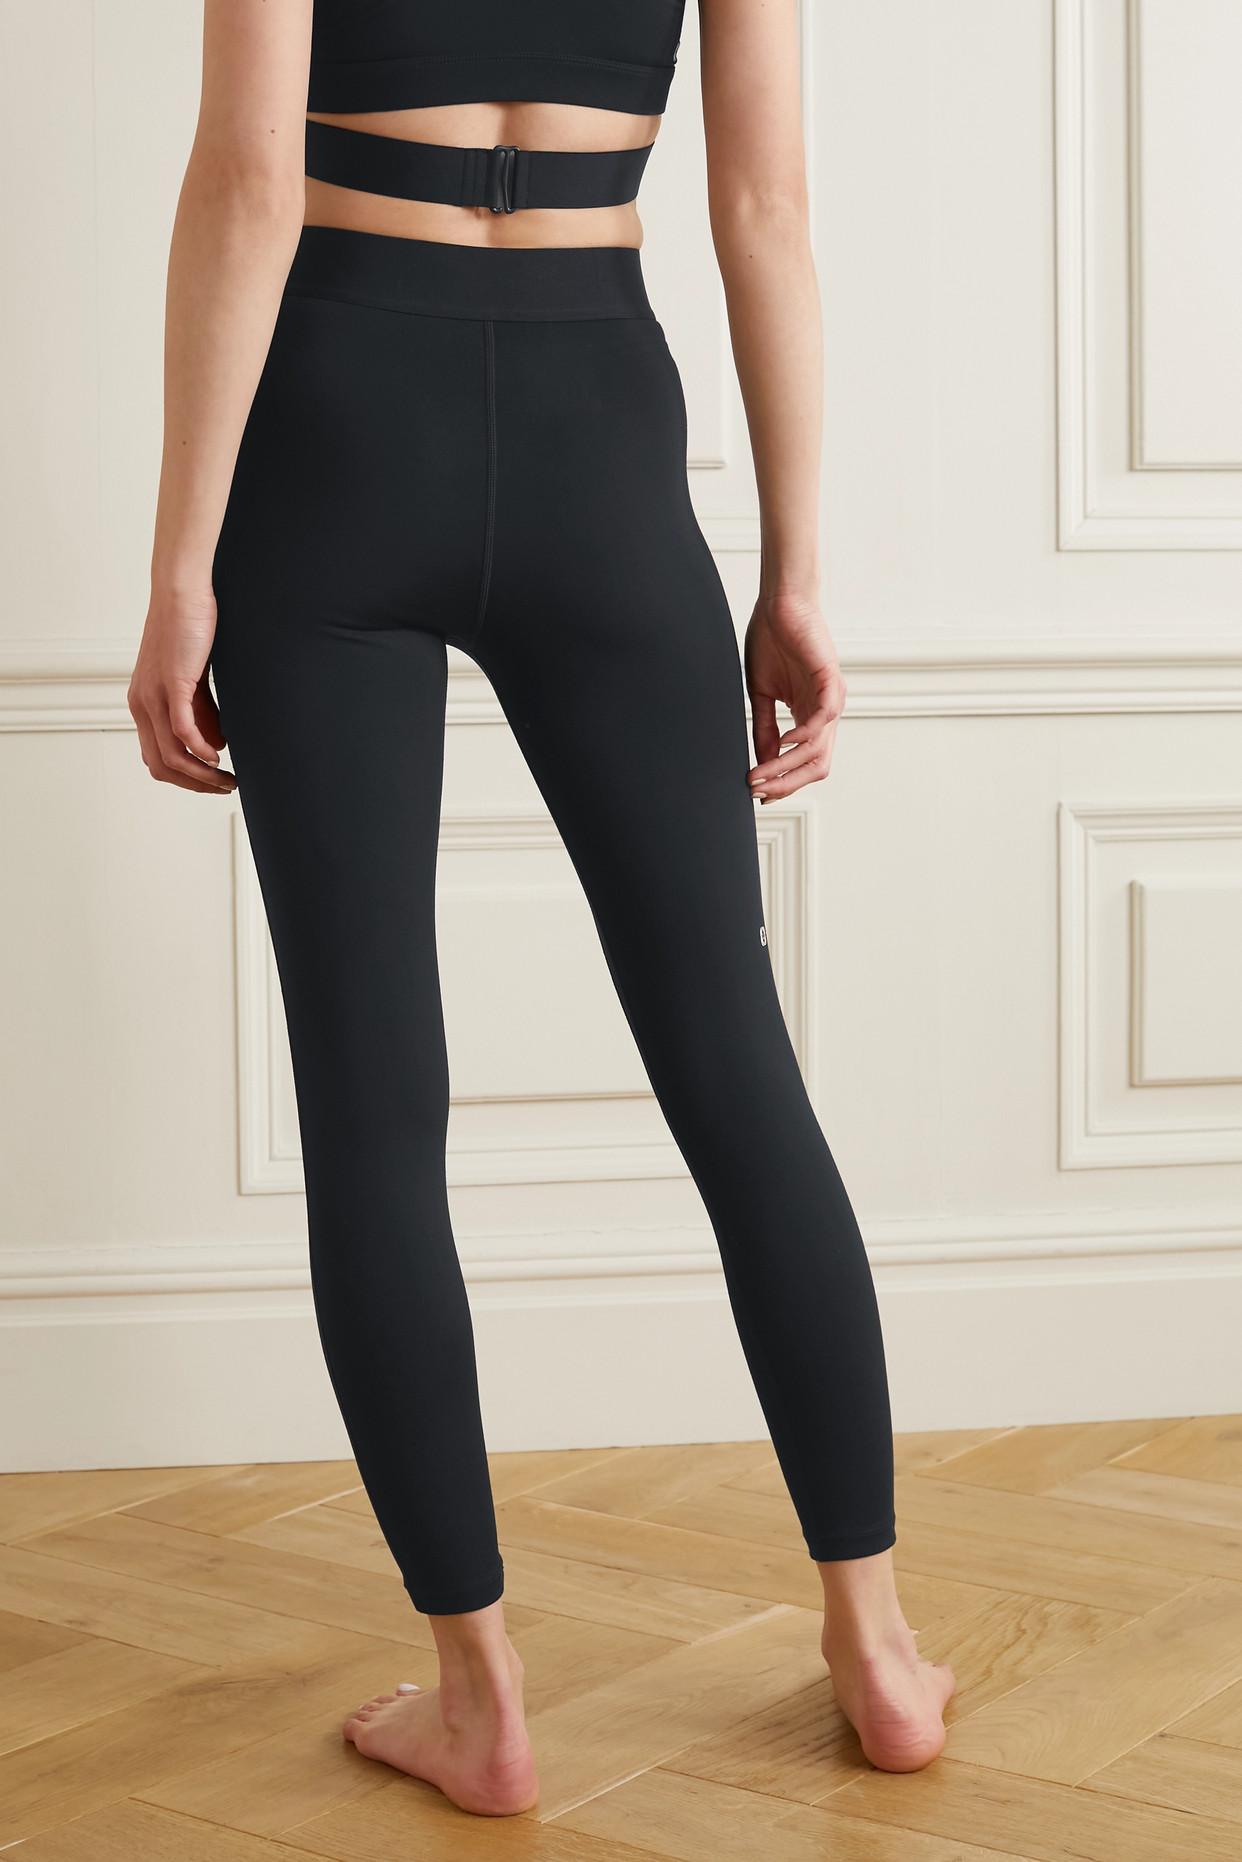 Le Ore Corso Cutout Recycled Stretch Leggings in Black